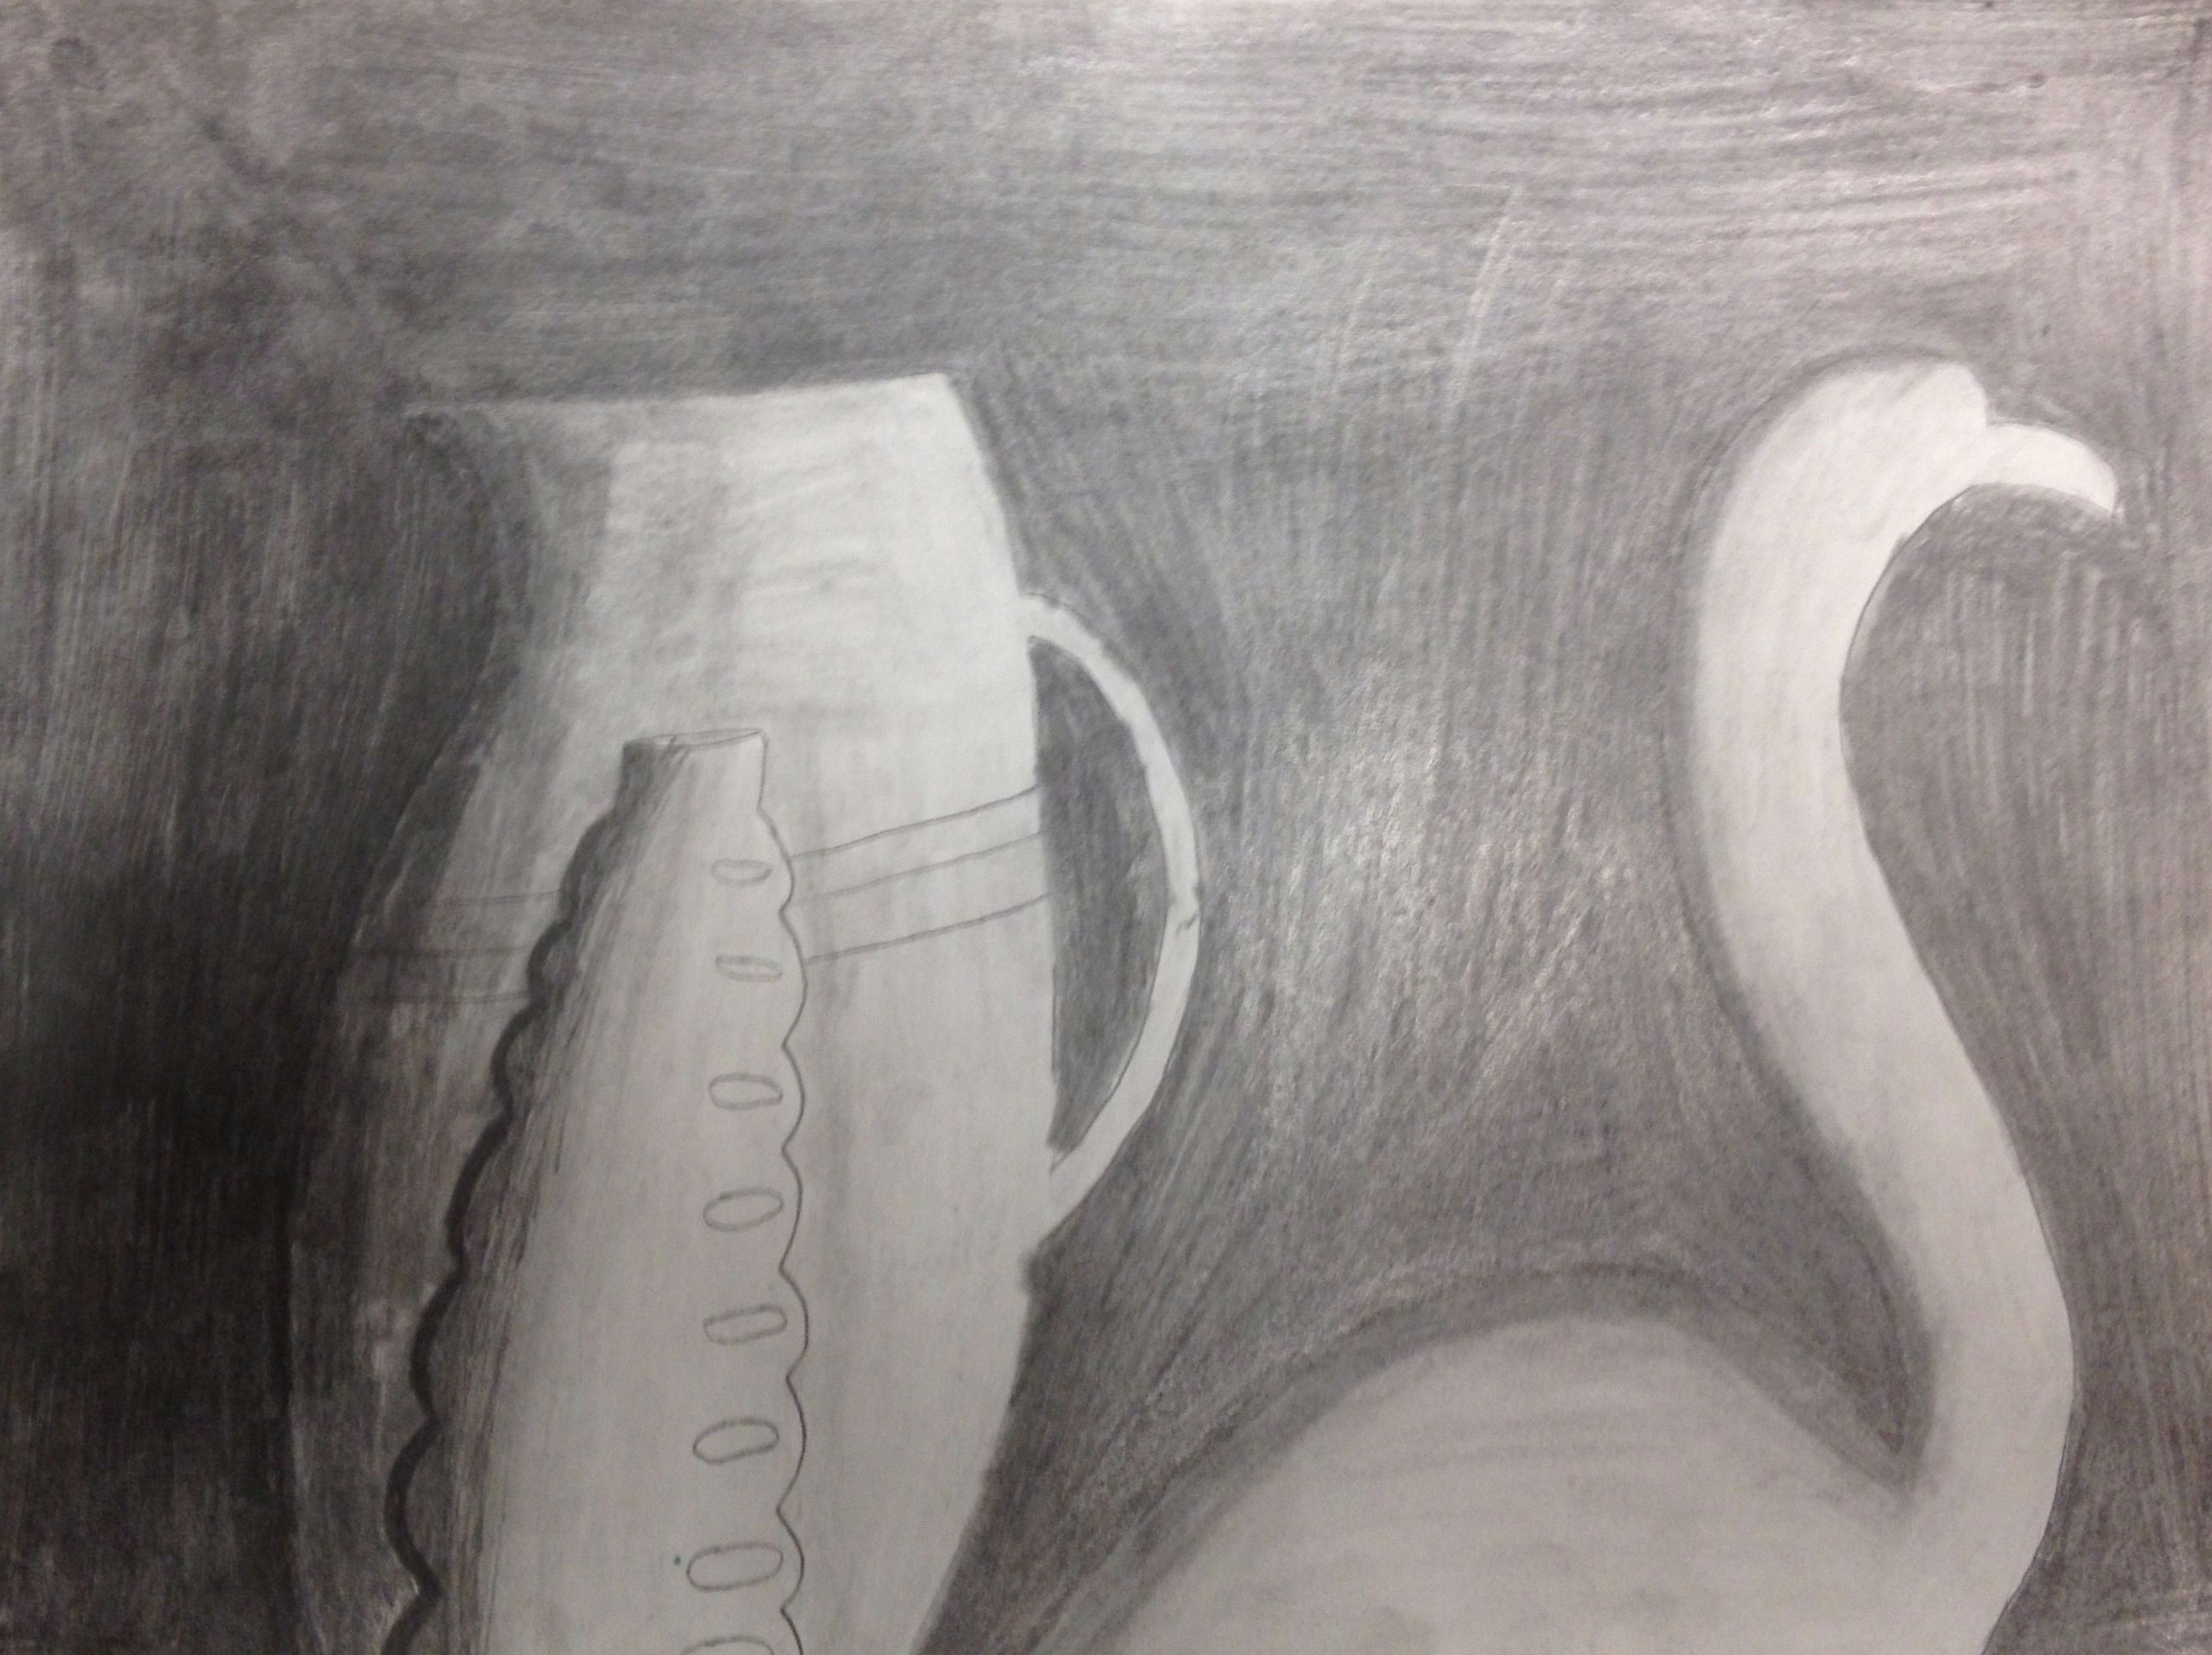 for this project we drew multiple objects from a table we used shading to make